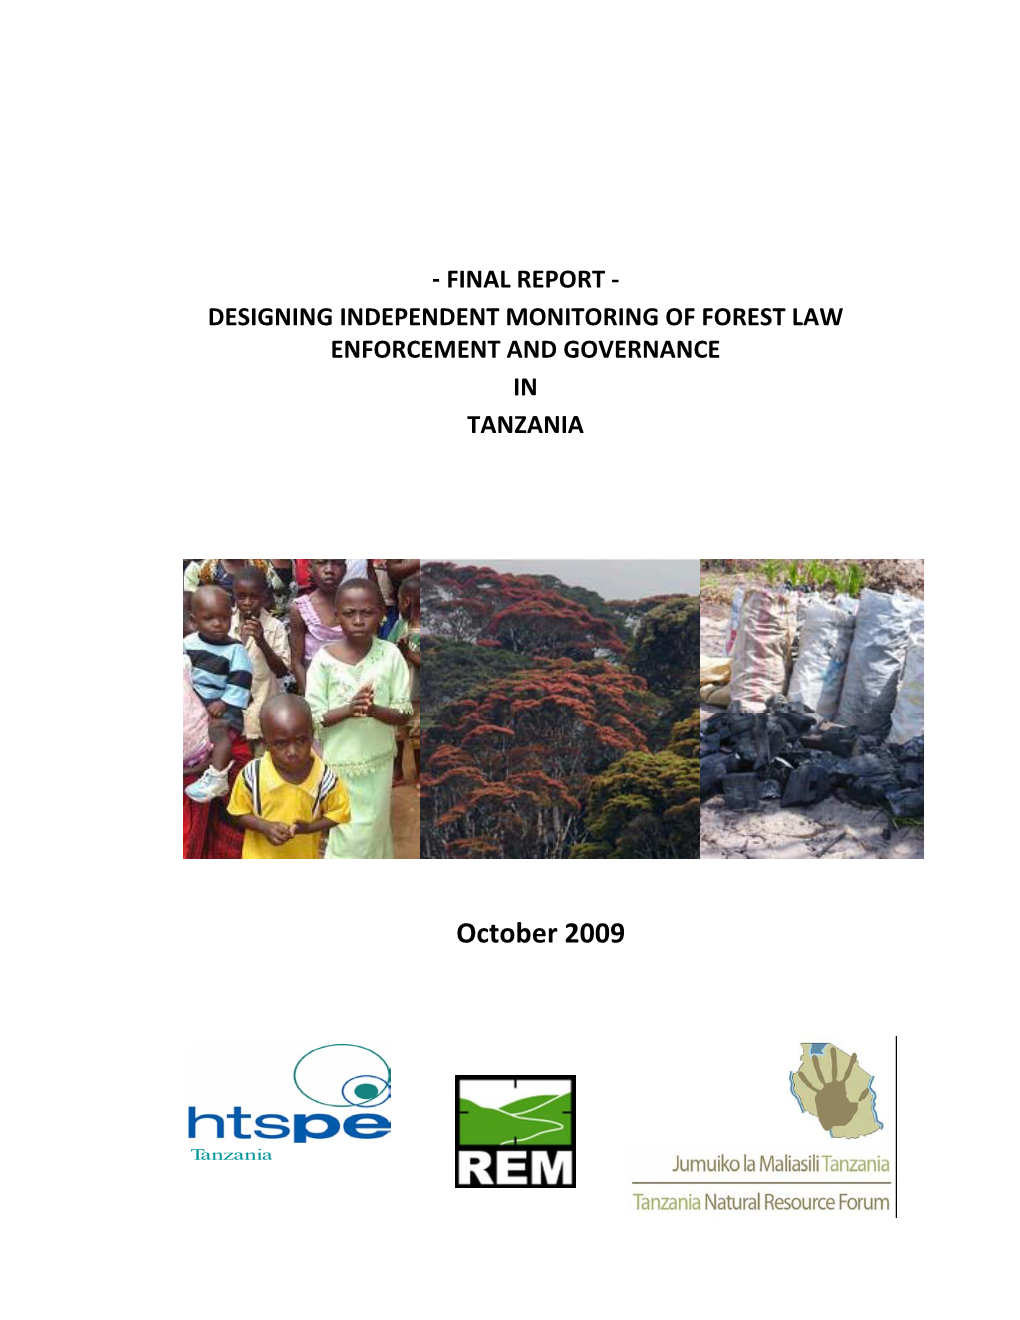 Final Report - Designing Independent Monitoring of Forest Law Enforcement and Governance in Tanzania